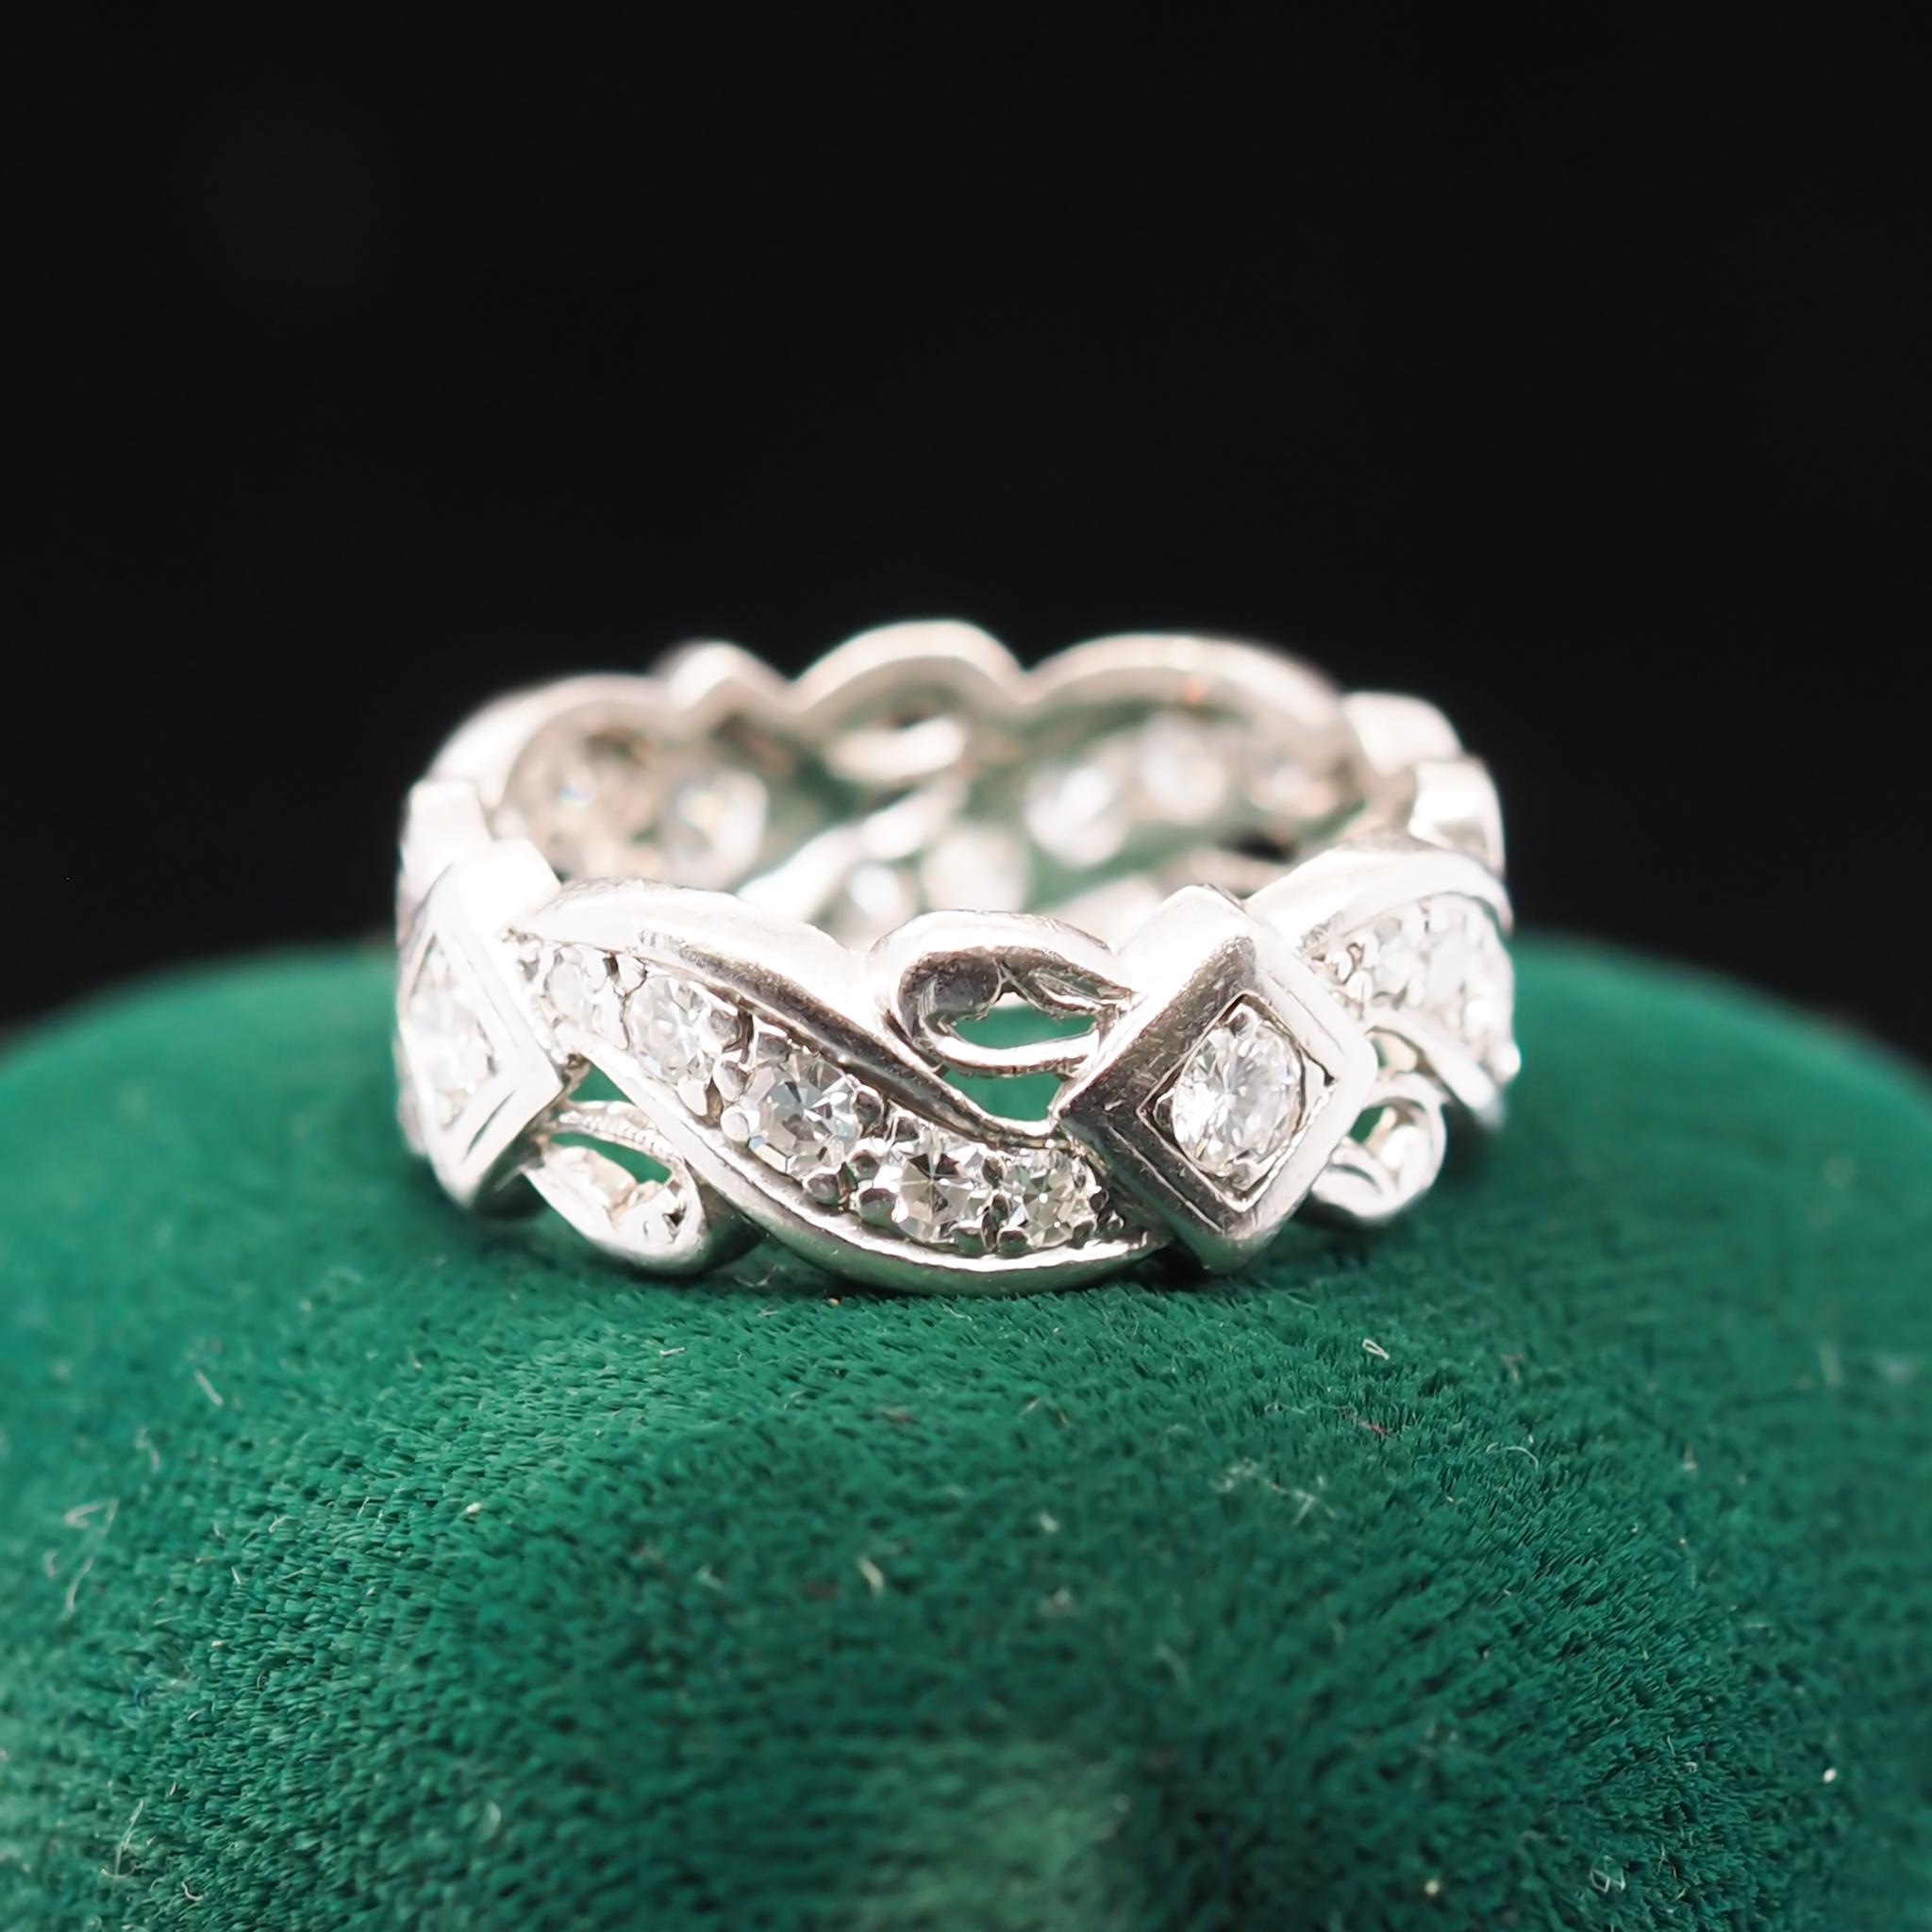 Year: 1940s

Item Details:
Ring Size: 6.25
Metal Type: Platinum [Hallmarked, and Tested]
Weight: 5.7 grams

Diamond Details: .40ct total weight, G-H Color, VS Clarity, Natural Diamonds, Transitional European Cut.

Band Width: 7.3 mm
Condition: